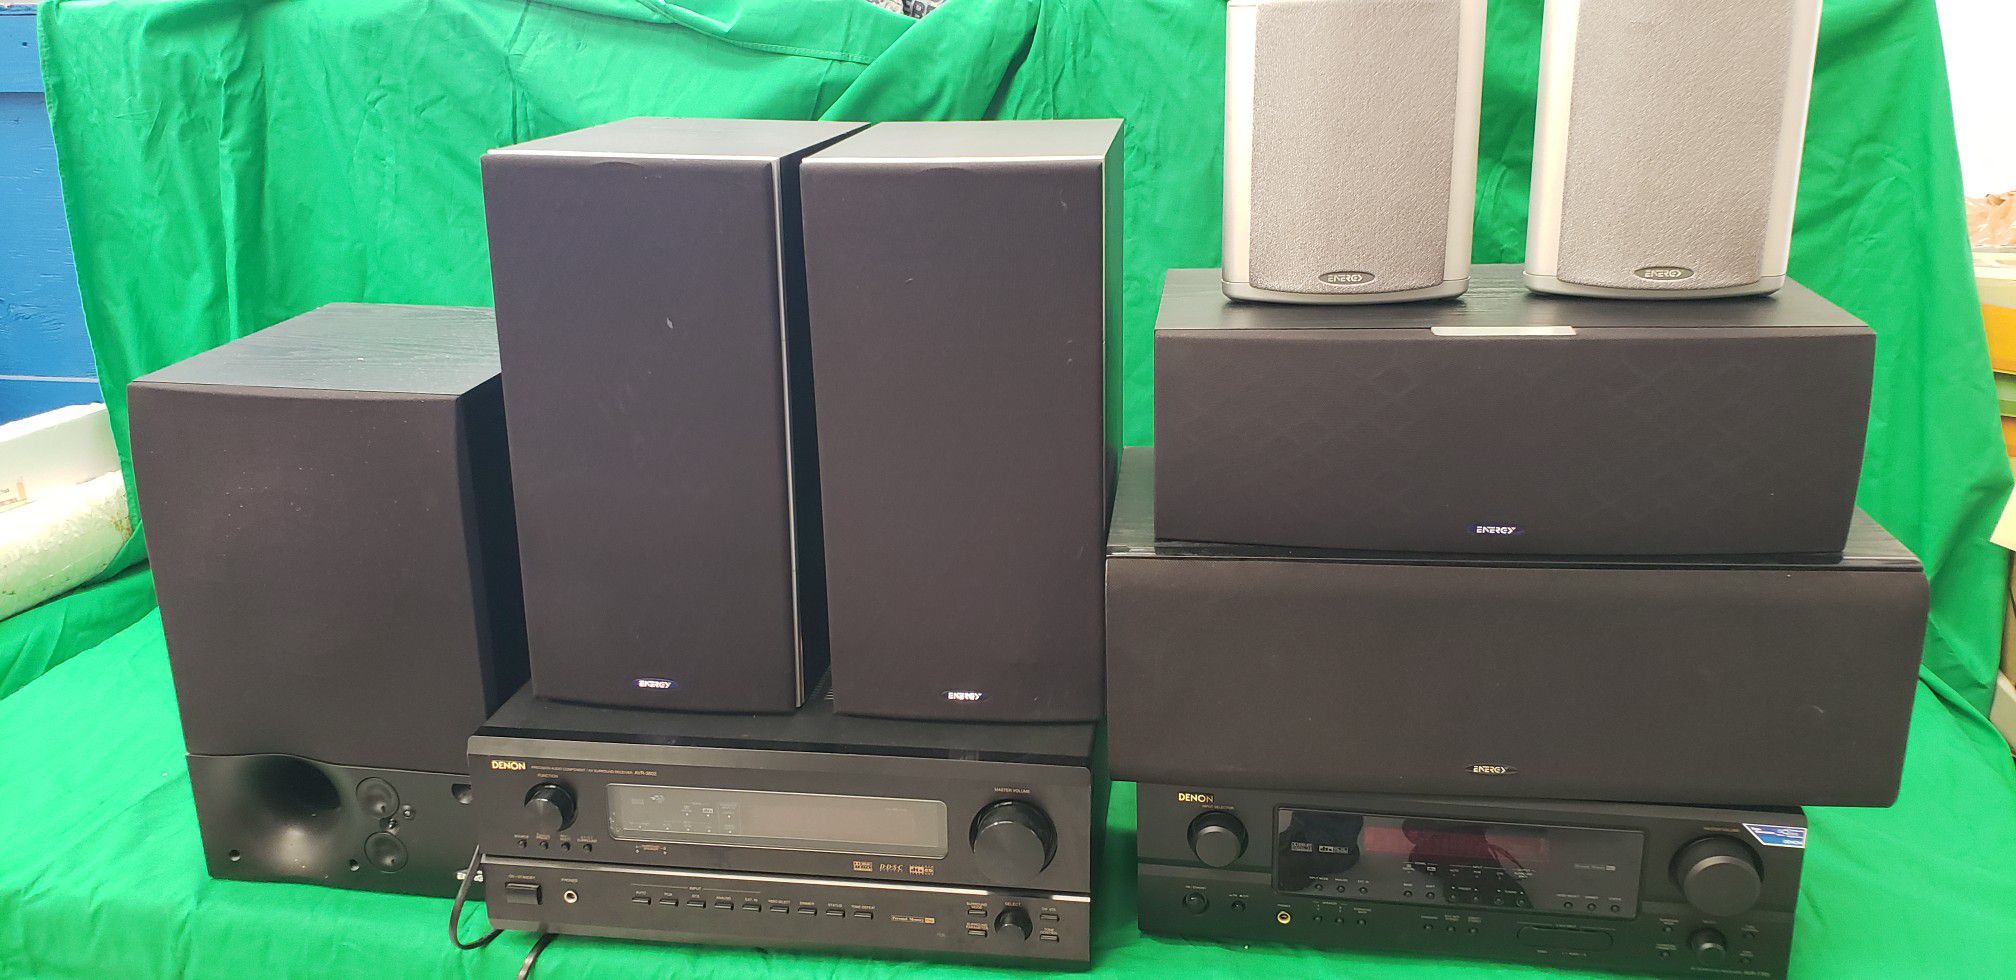 7 Energy Speakers and 2 Denon Receivers